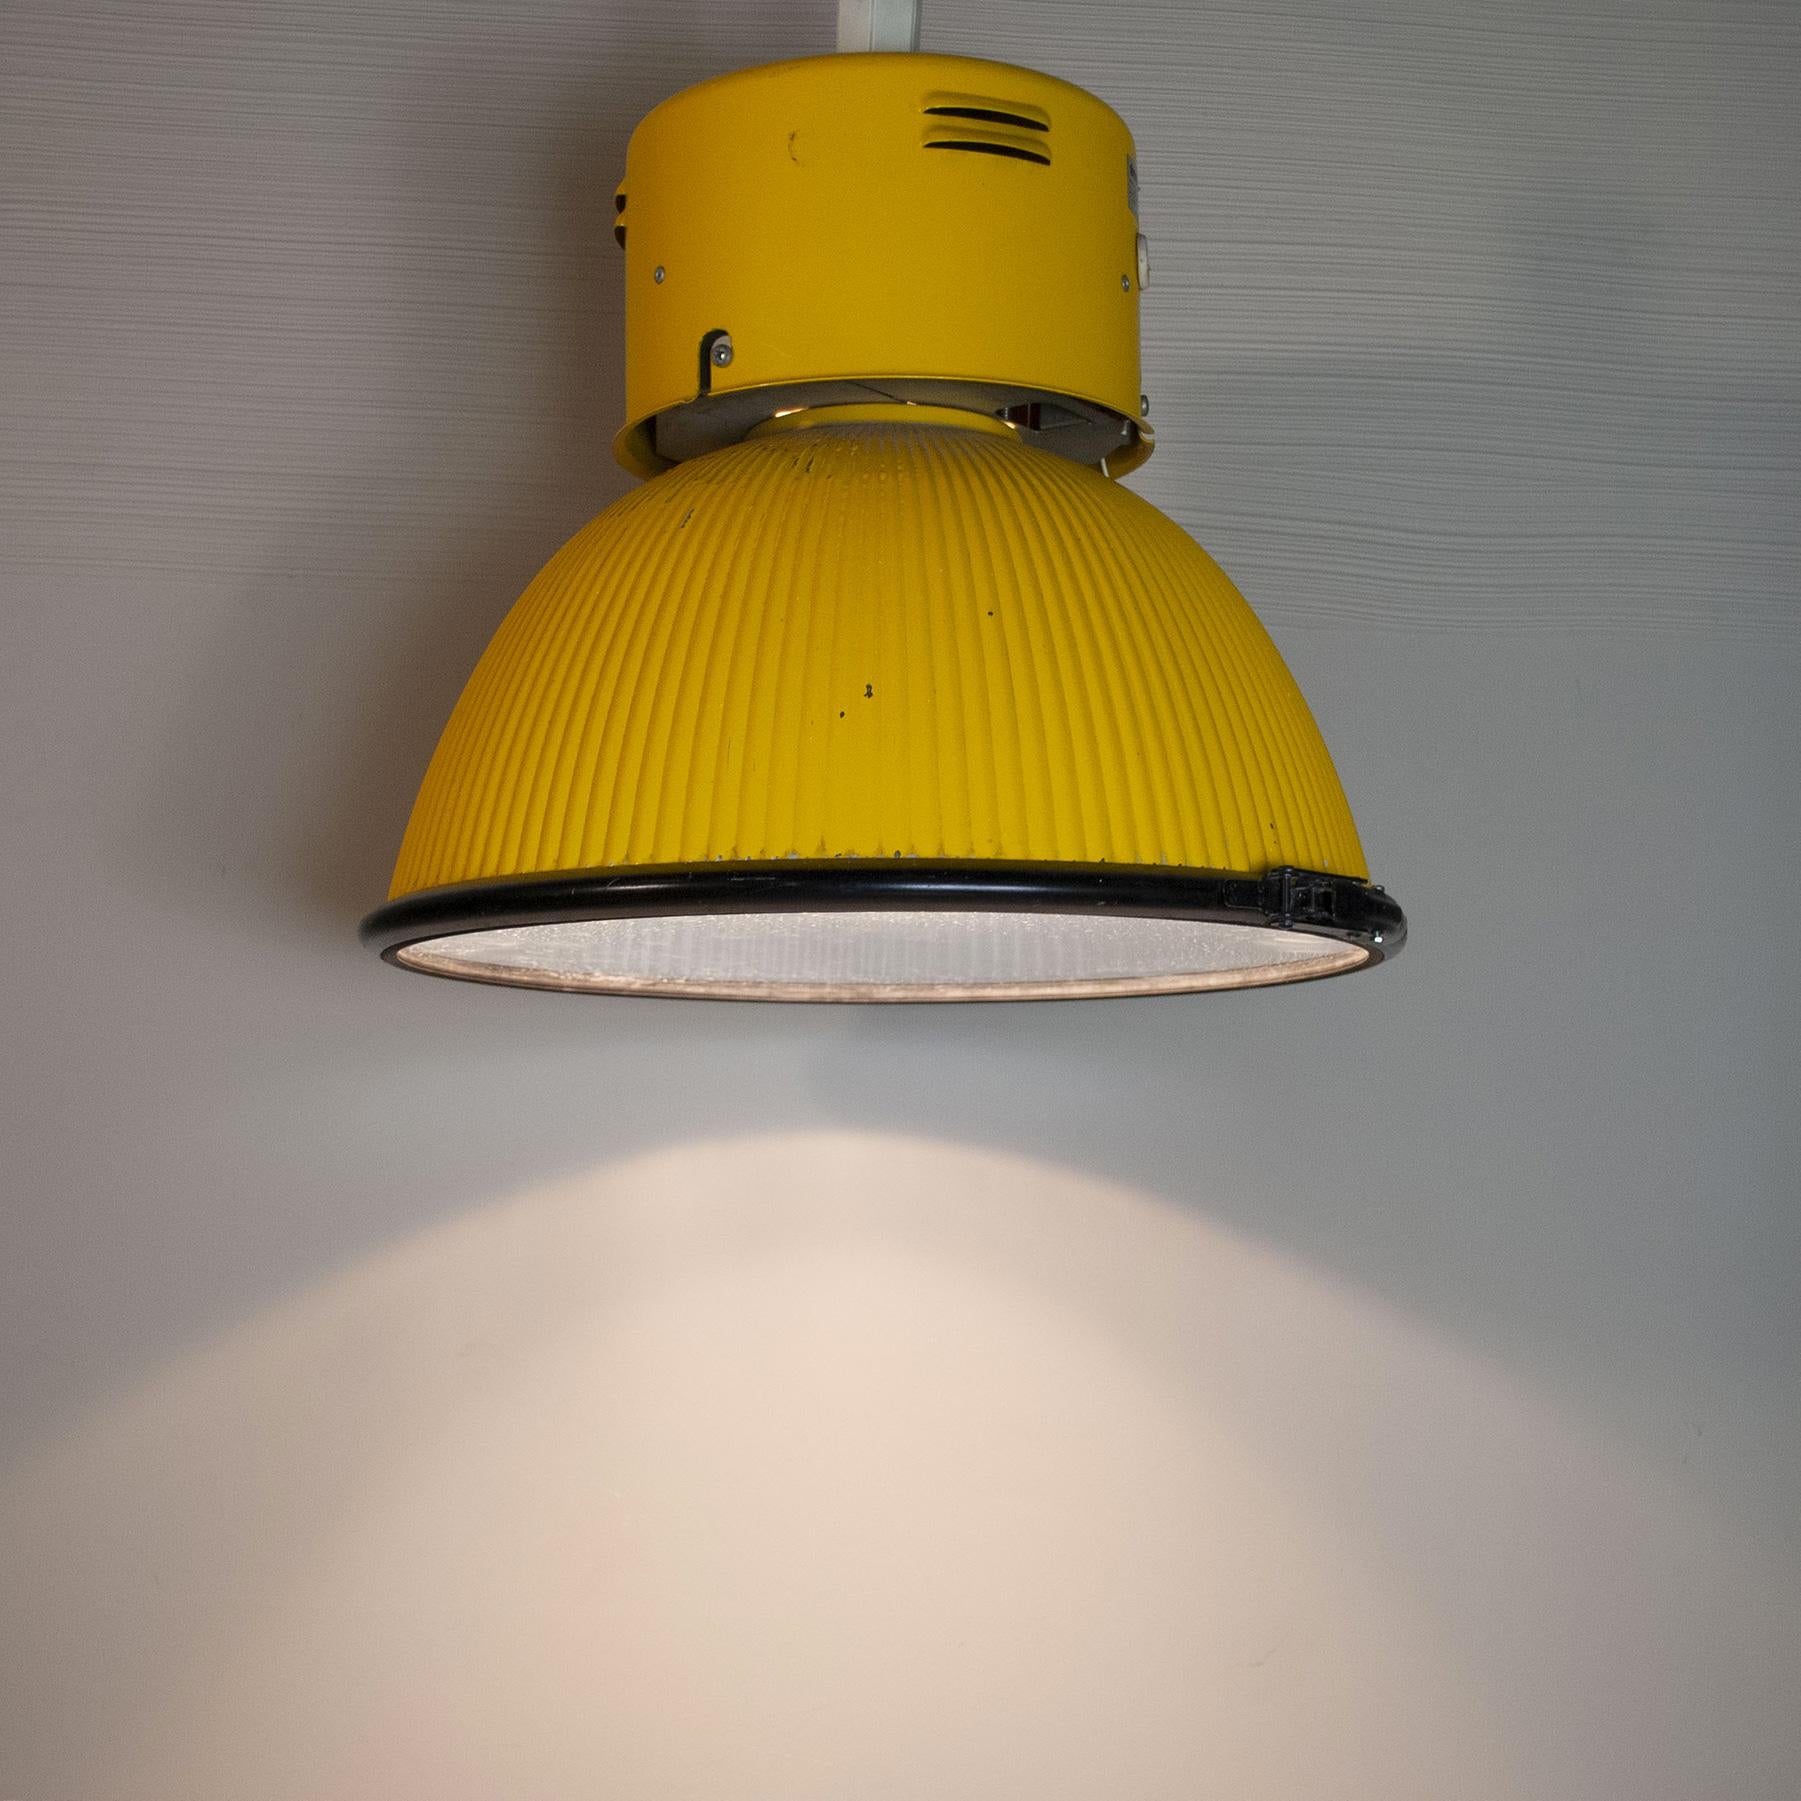 Available pair of large industrial lamps from the 1980s, Disano brand in yellow lacquered aluminum.